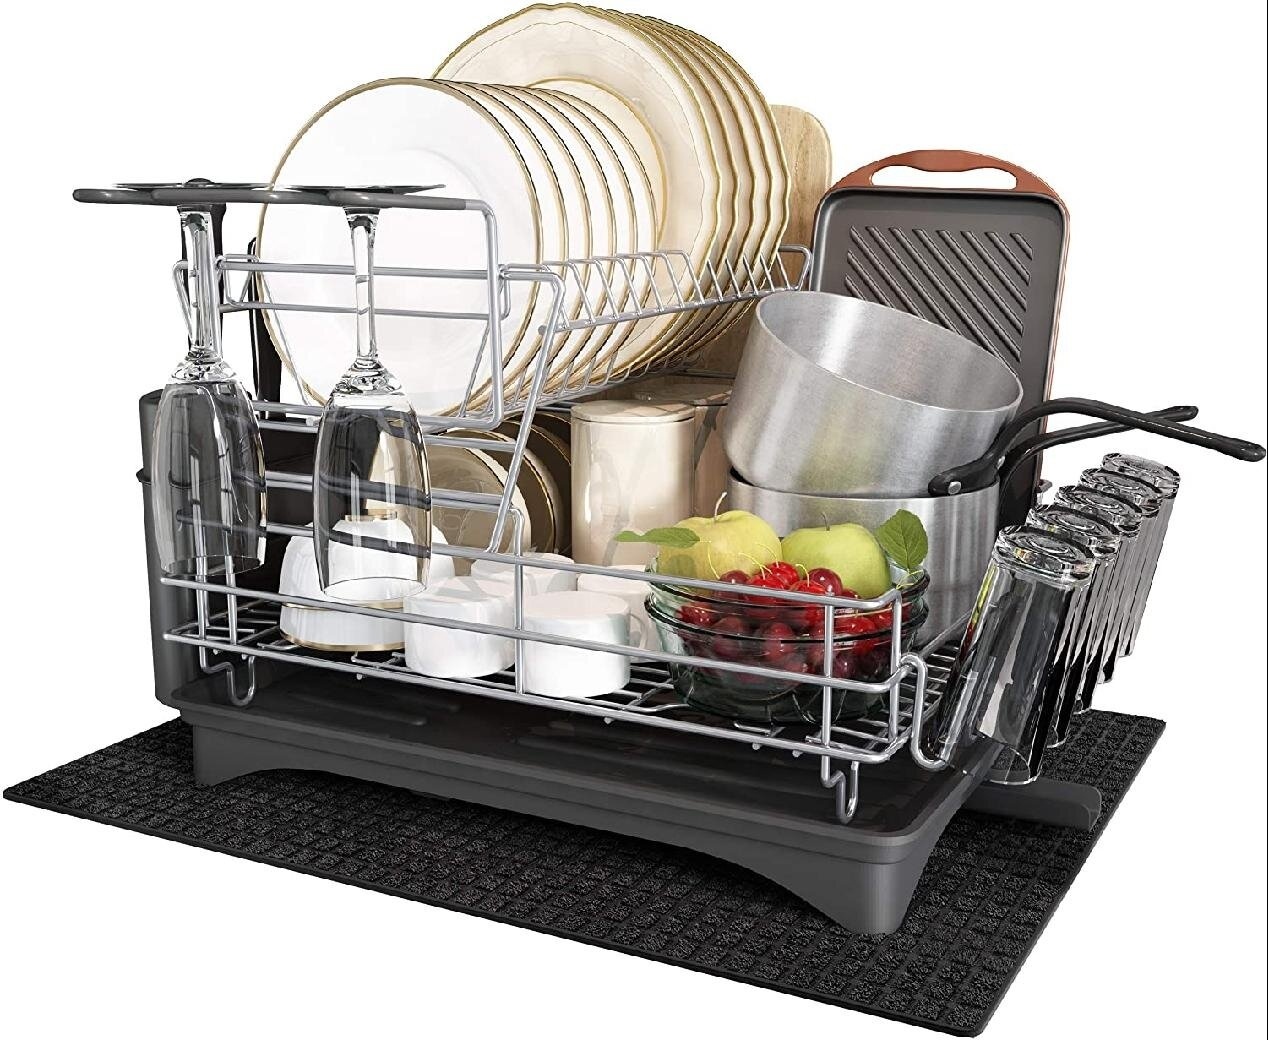 17.7 x 15.5 Large Dish Drying Rack, Attom Tech Home Roll Up Dish Racks  Multipurpose Foldable Stainless Steel Over Sink Kitchen Drainer Rack for  Cups